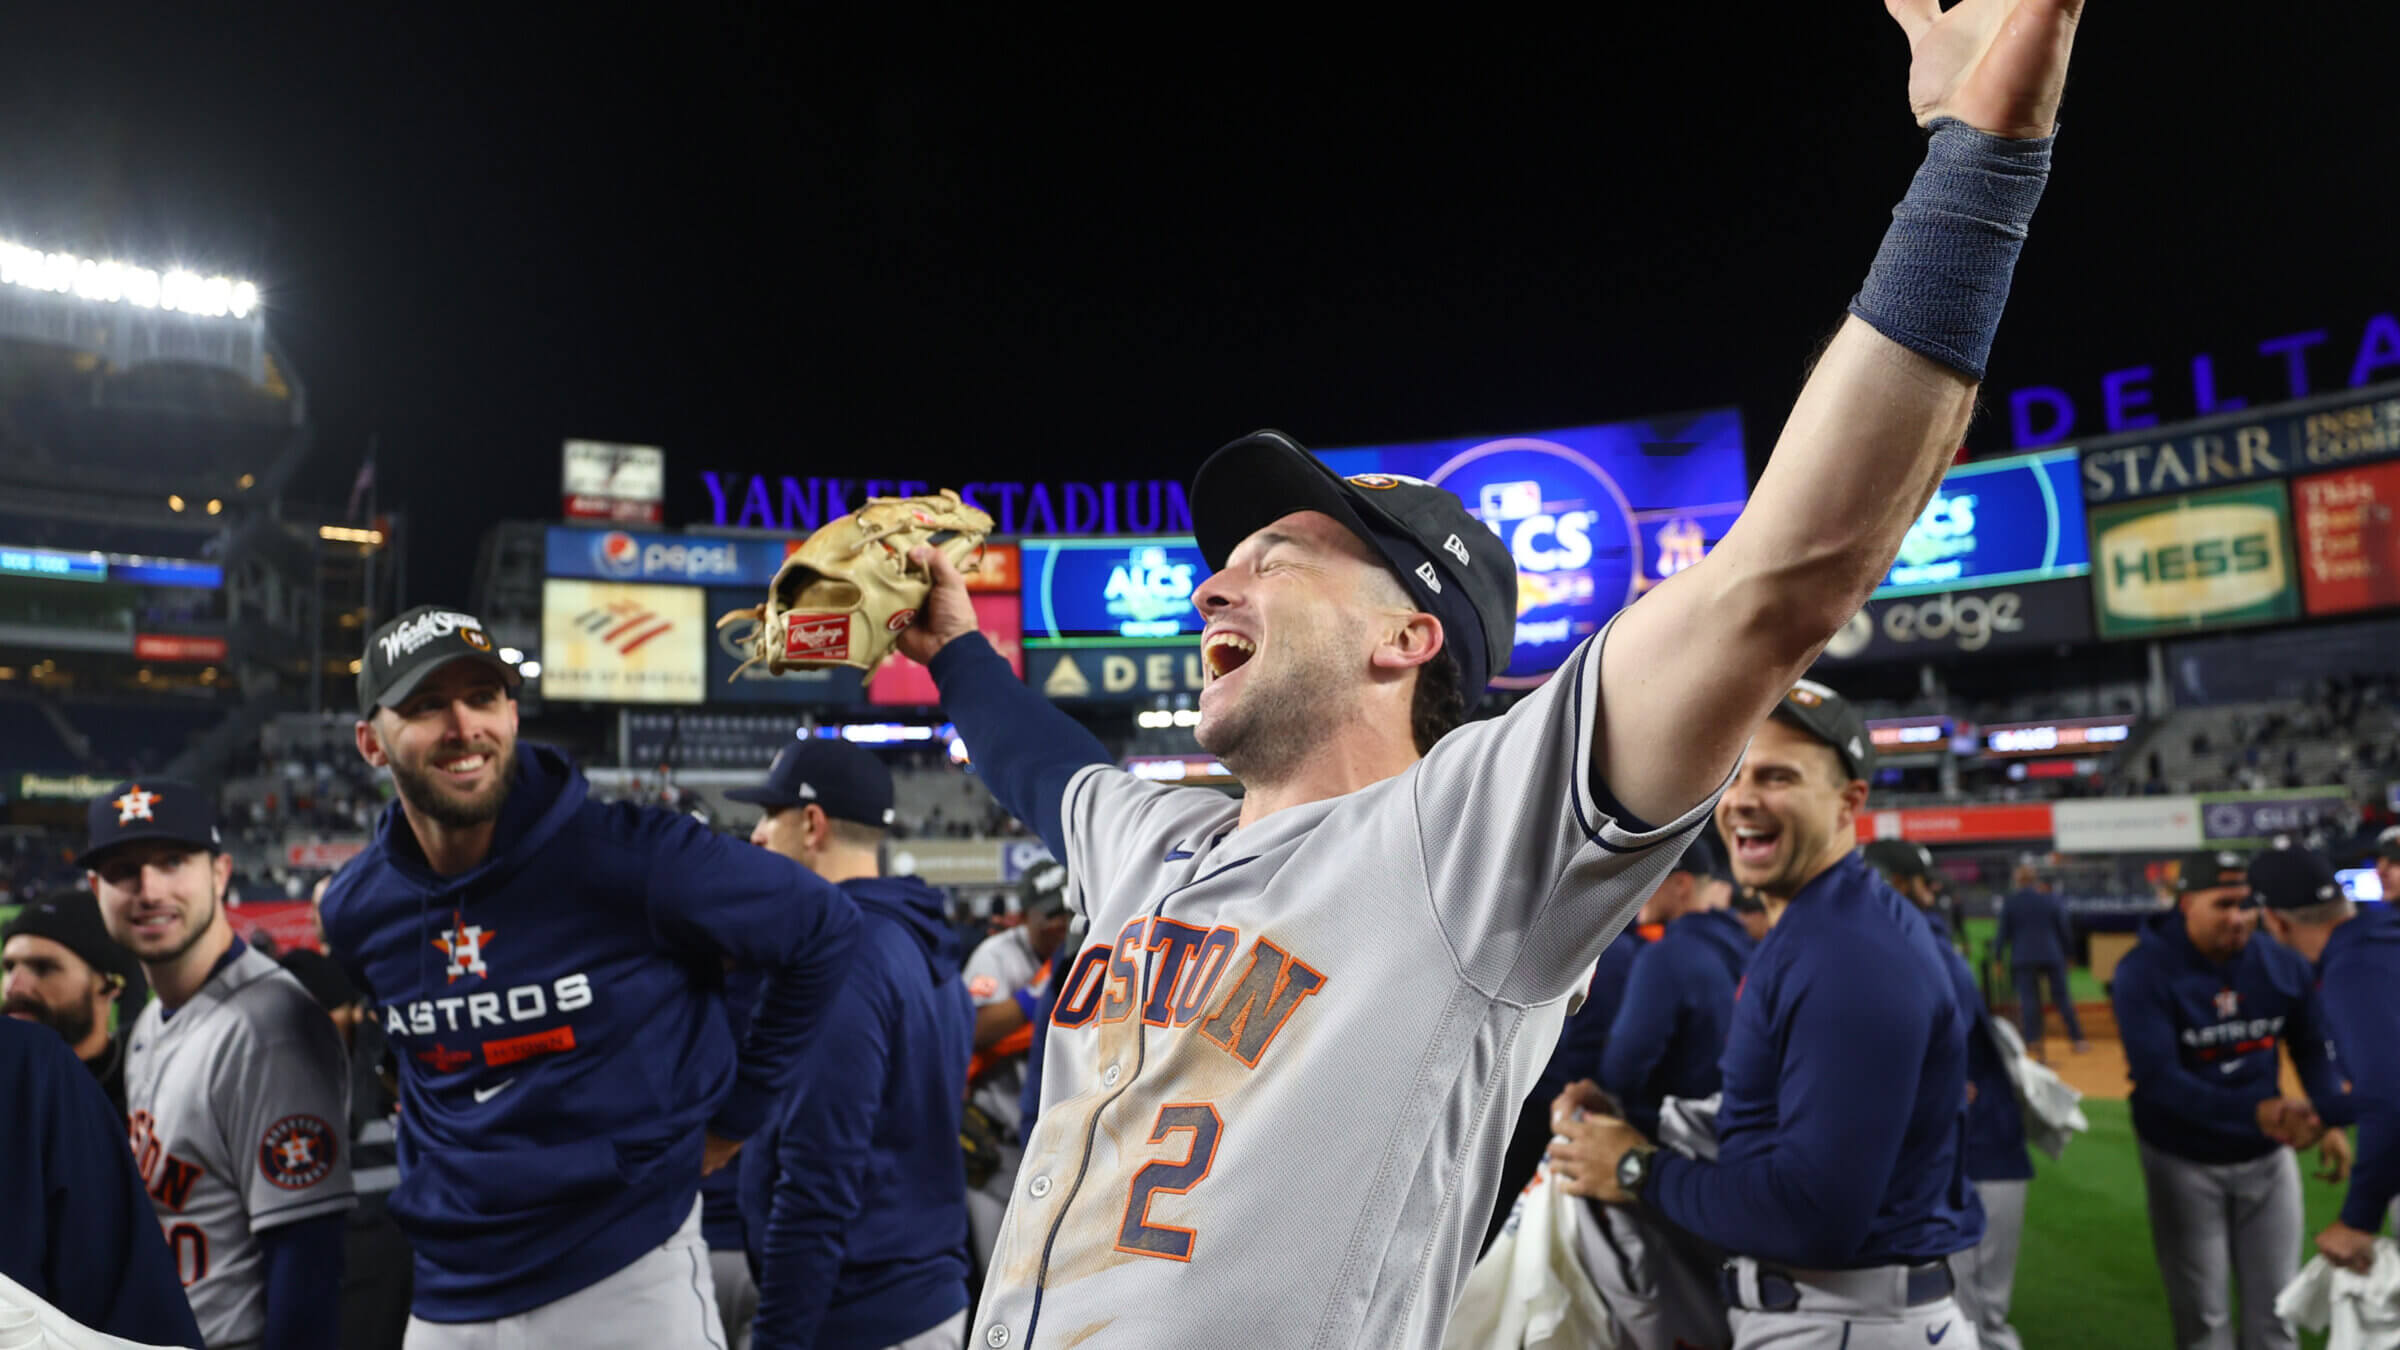 Alex Bregman of the Houston Astros celebrates after defeating the New York Yankees in game four of the American League Championship Series to advance to the World Series at Yankee Stadium on October 23, 2022